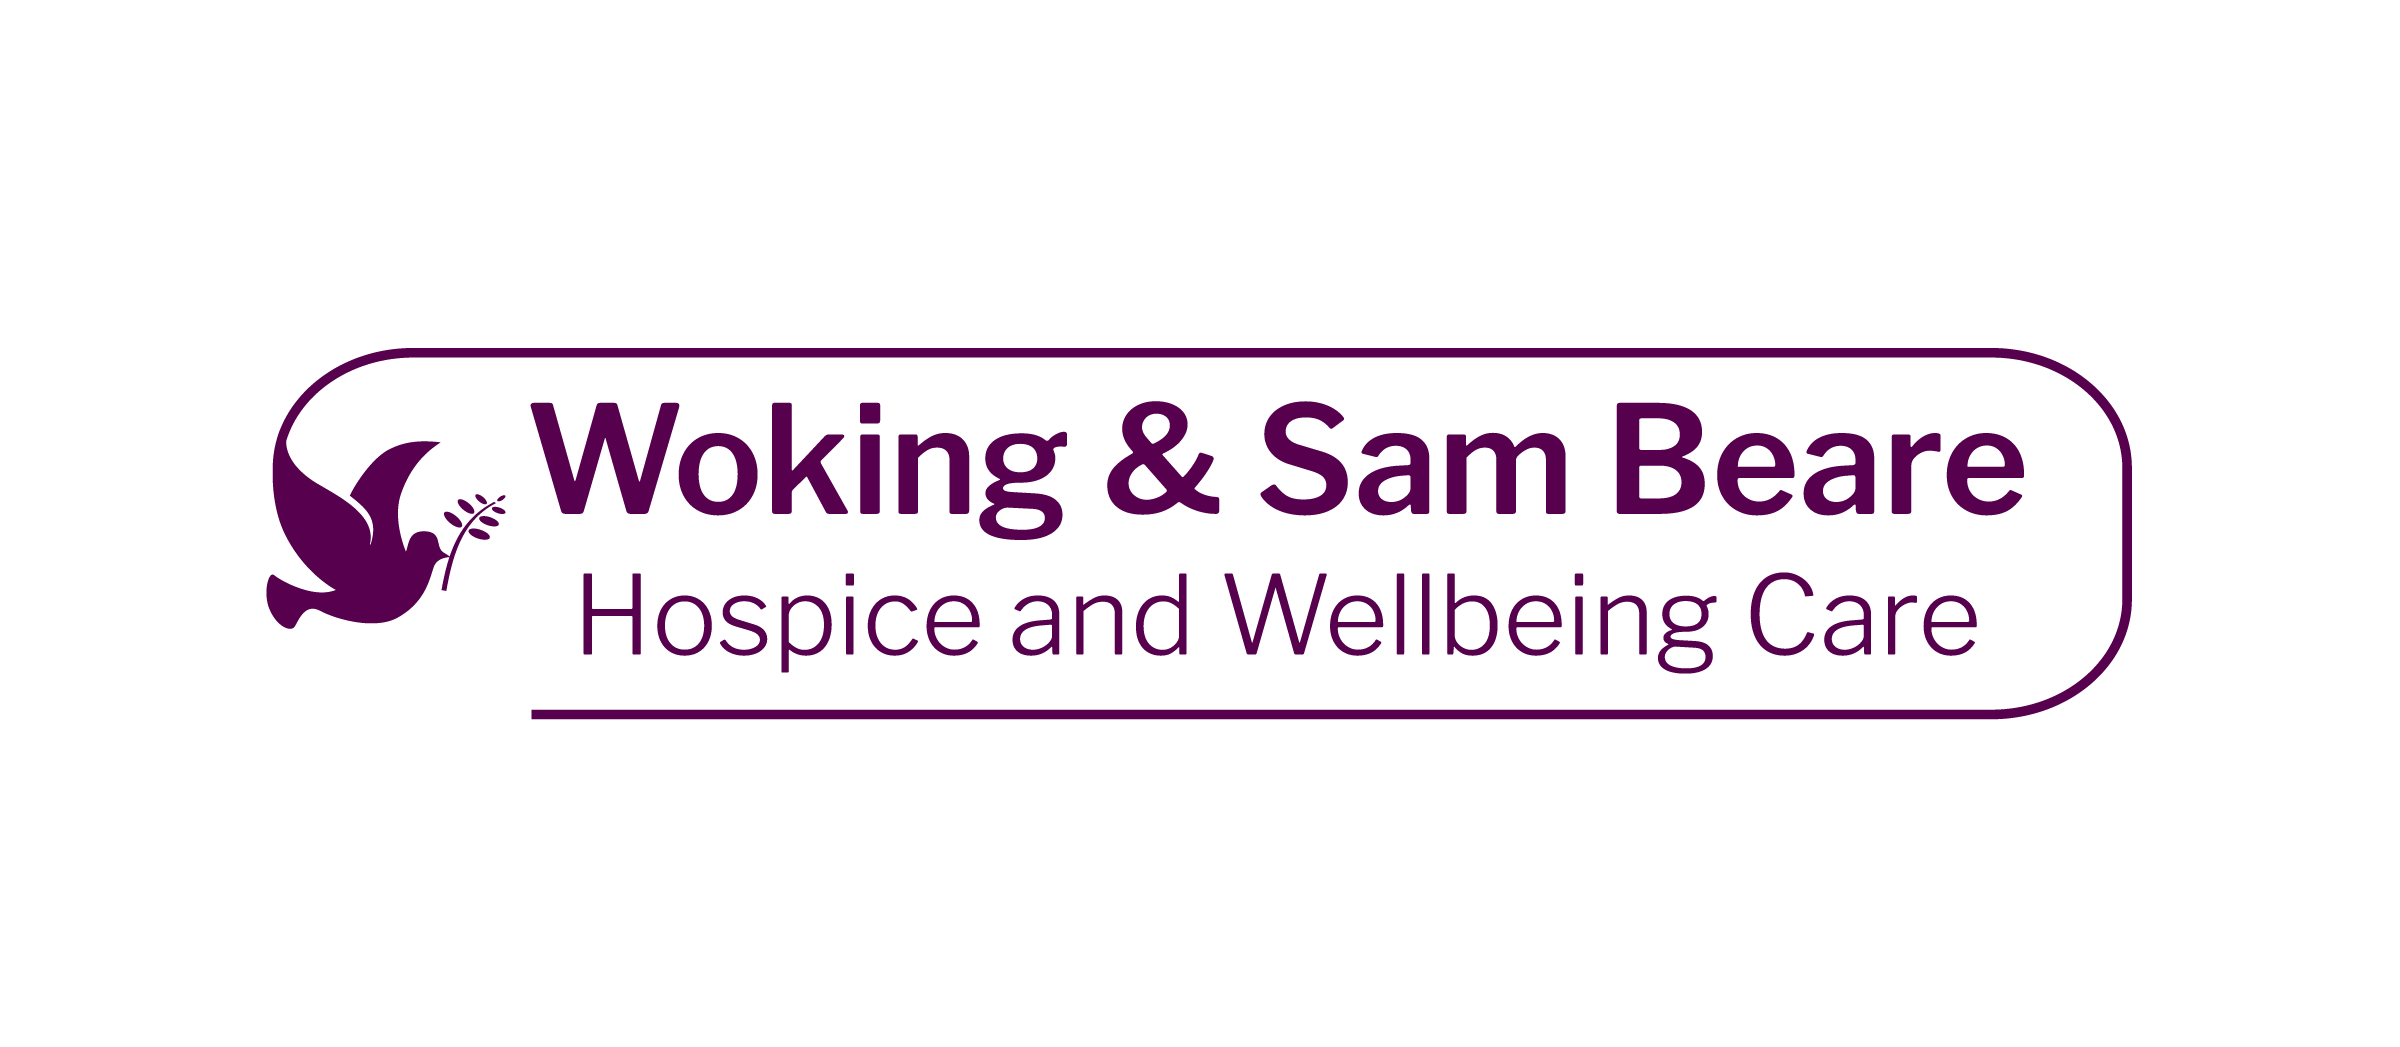 Woking & Sam Beare Hospice and Wellbeing Care